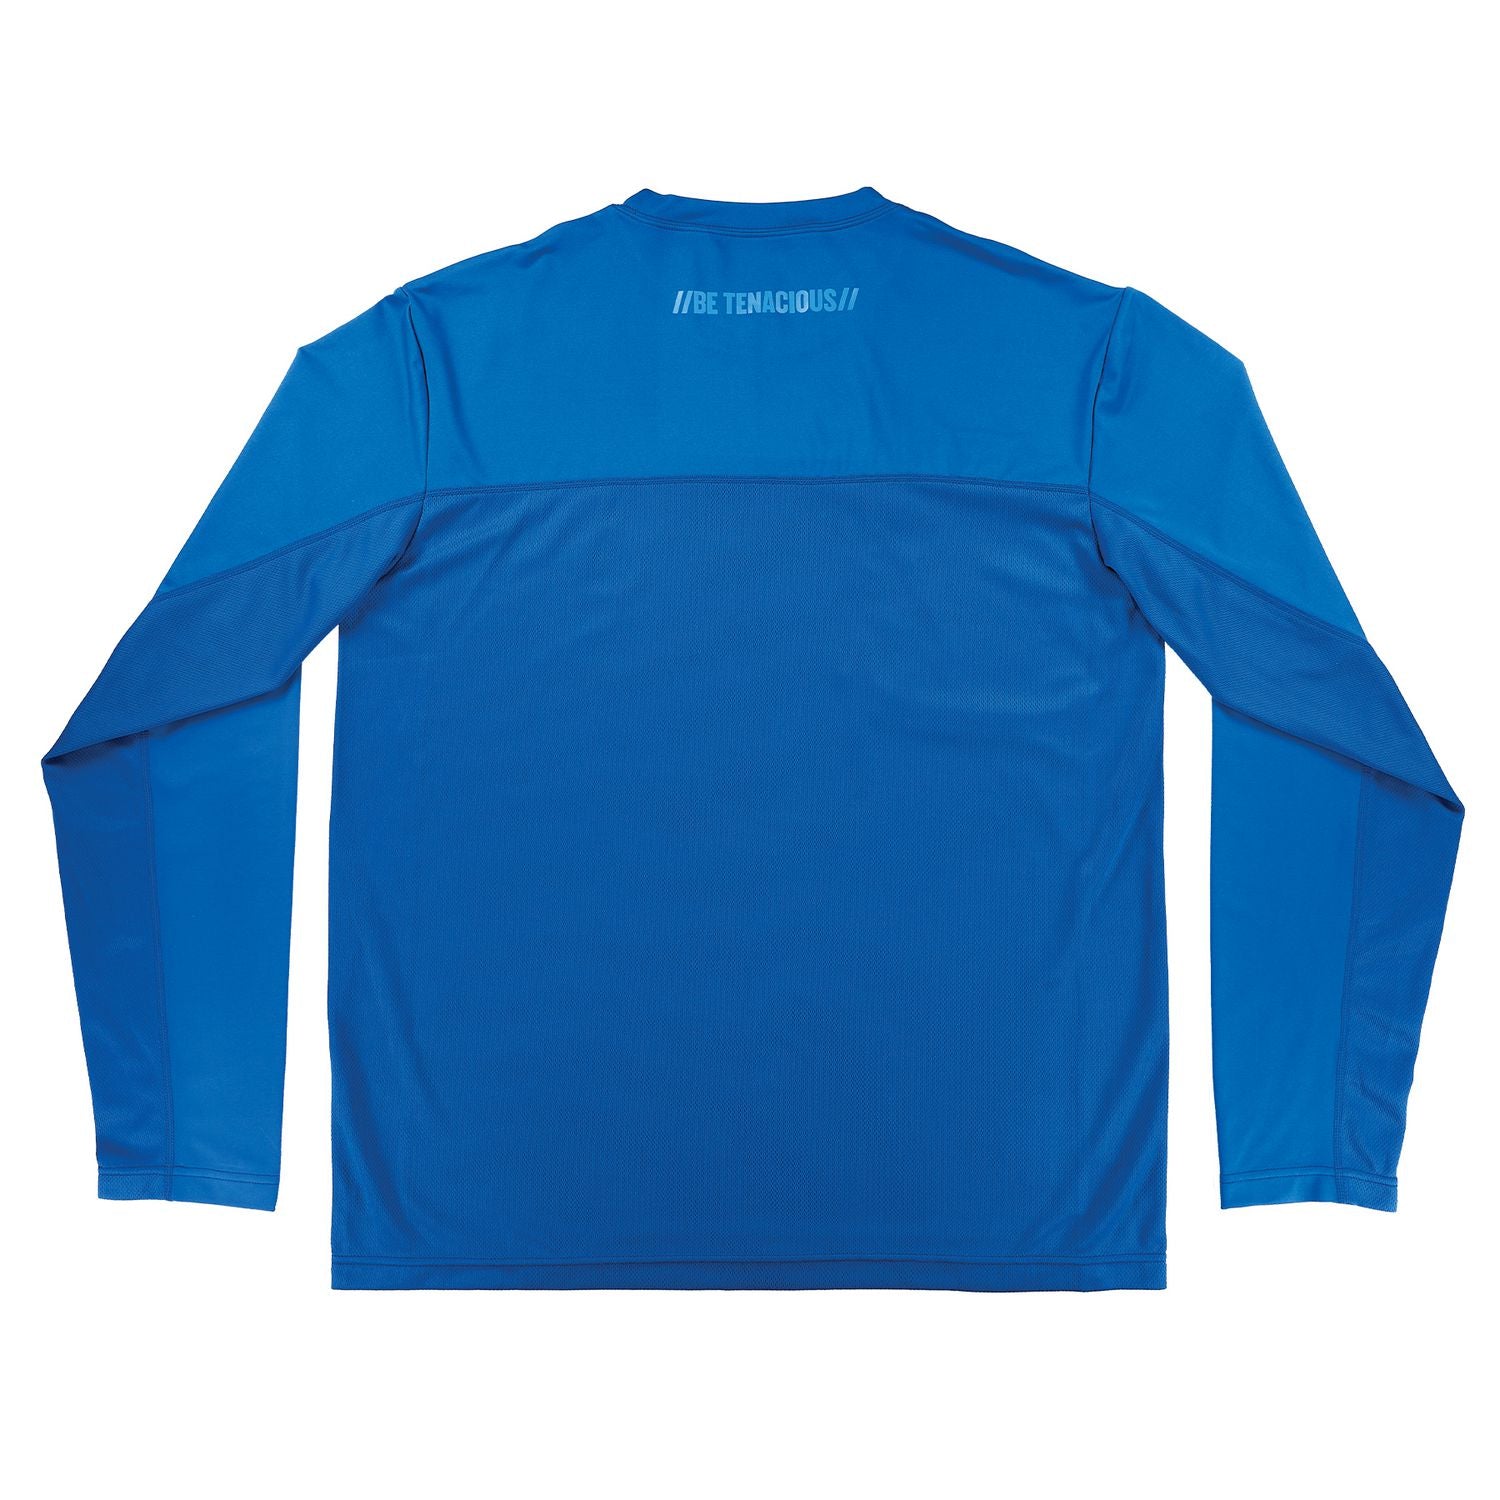 chill-its-6689-cooling-long-sleeve-sun-shirt-with-uv-protection-x-large-blue-ships-in-1-3-business-days_ego12155 - 2